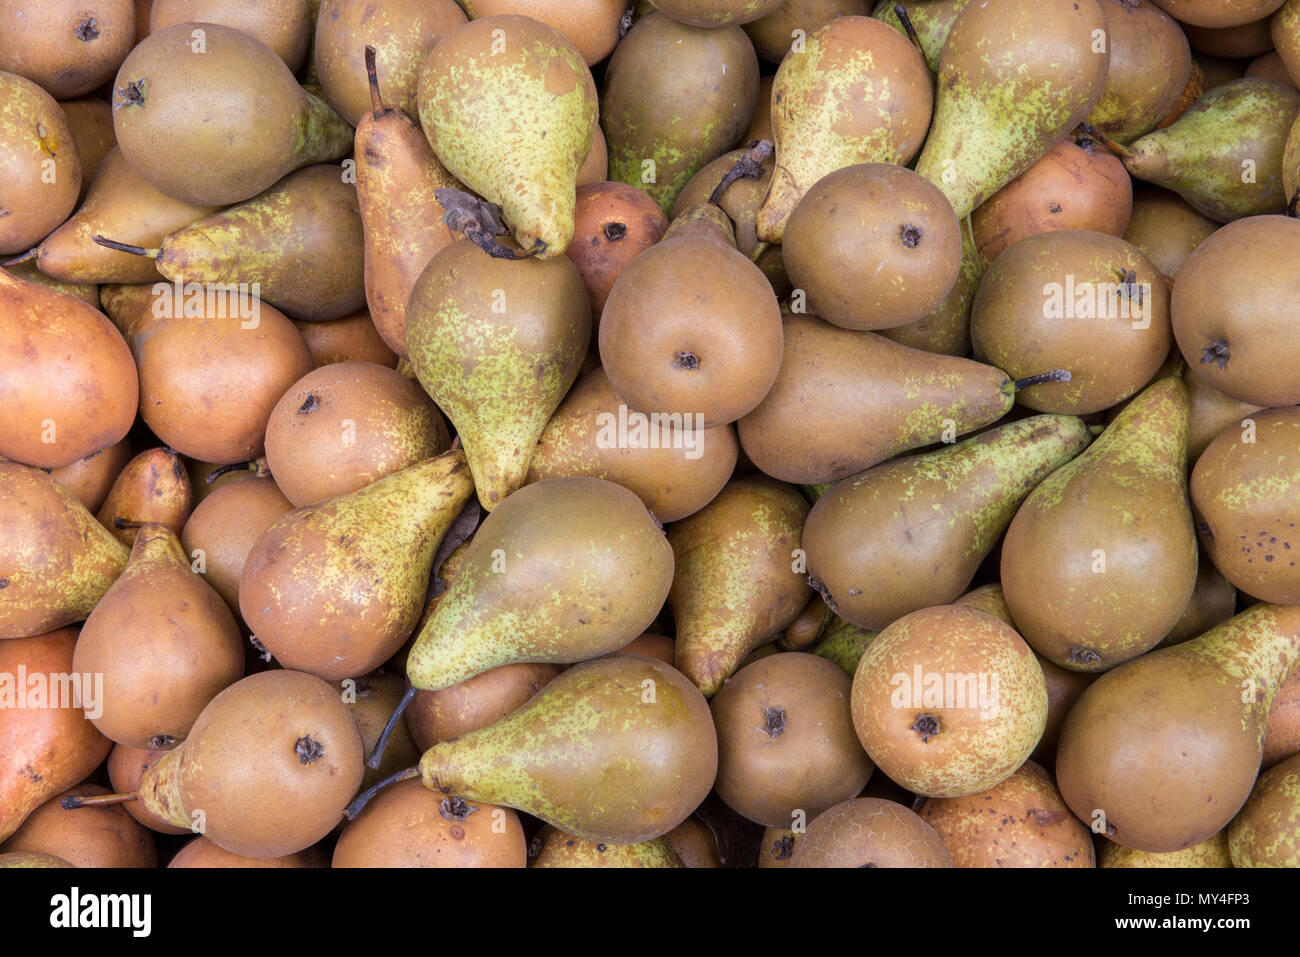 Freshly picked pears in an abstract composition.fresh fruits on display on a market stall. Pears for perry making and healthy eating.good foods health Stock Photo